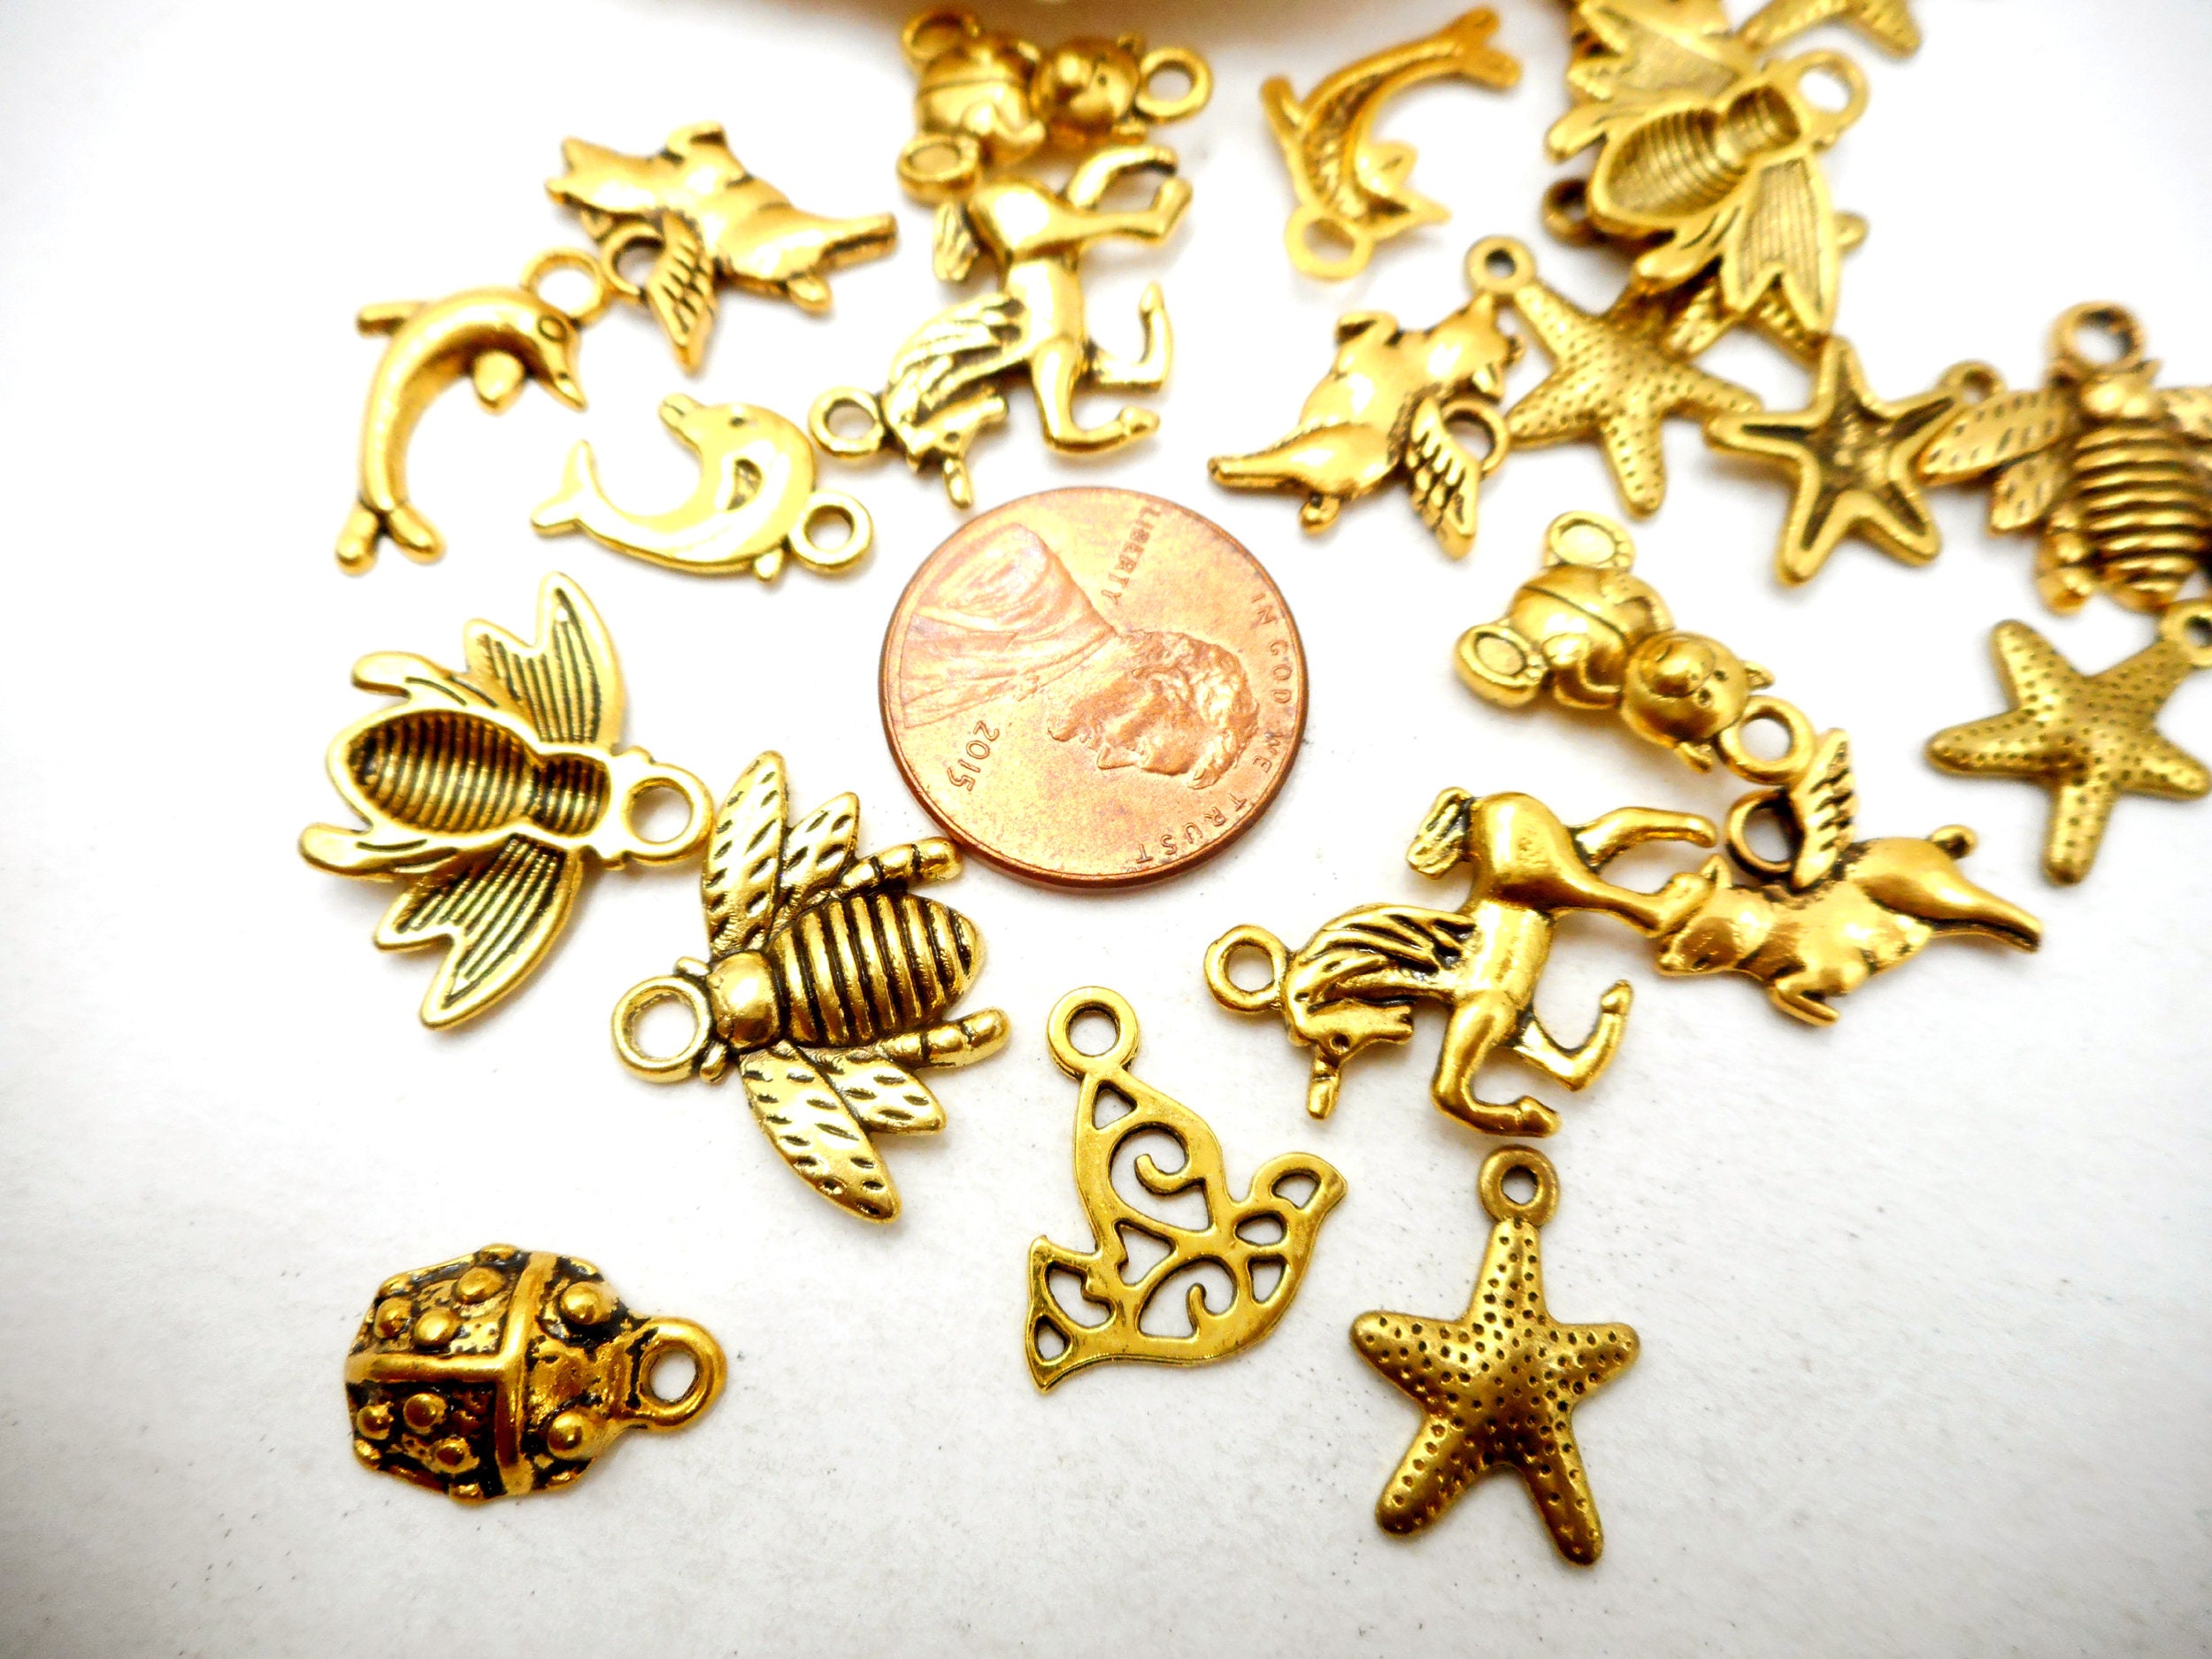 24 Assorted Antique Gold Charms - 23-33-20A